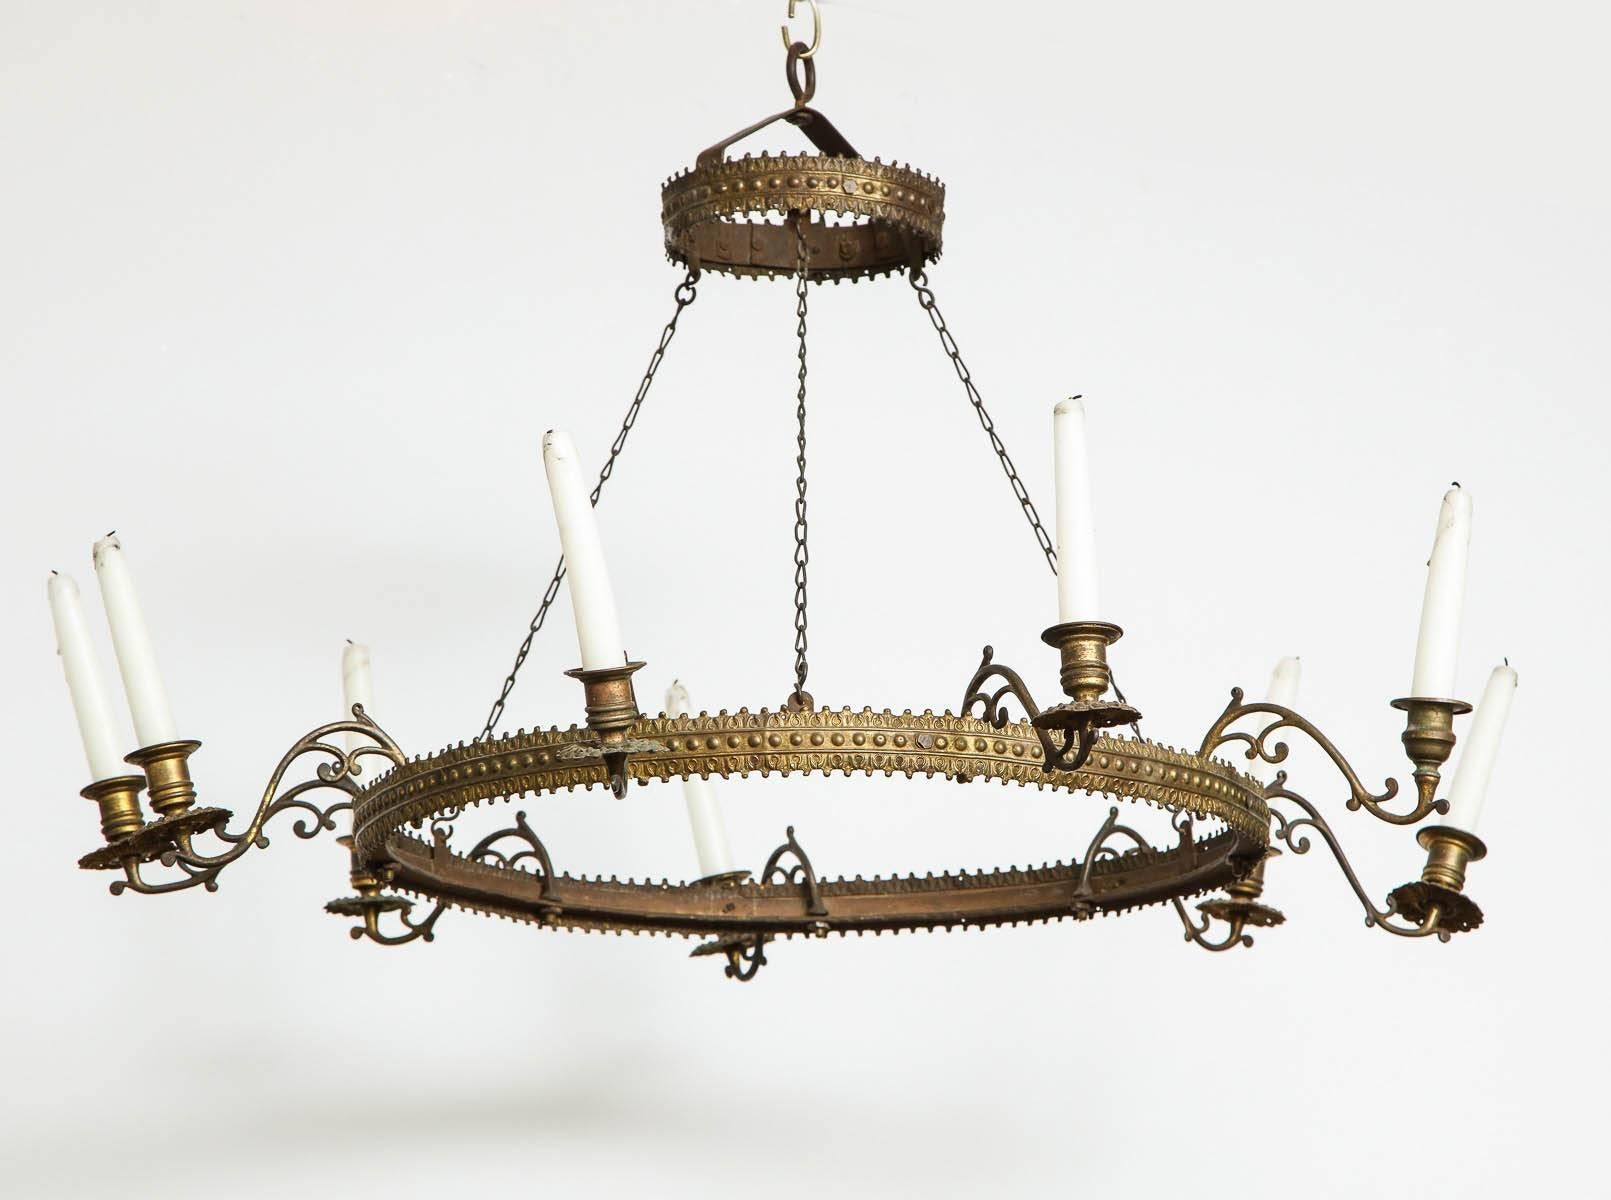 A nine candle light Swedish repousse brass and wrought iron ring chandelier with a simple, elegant design. Unusually shallow drop. Sweden, circa 1830.

   